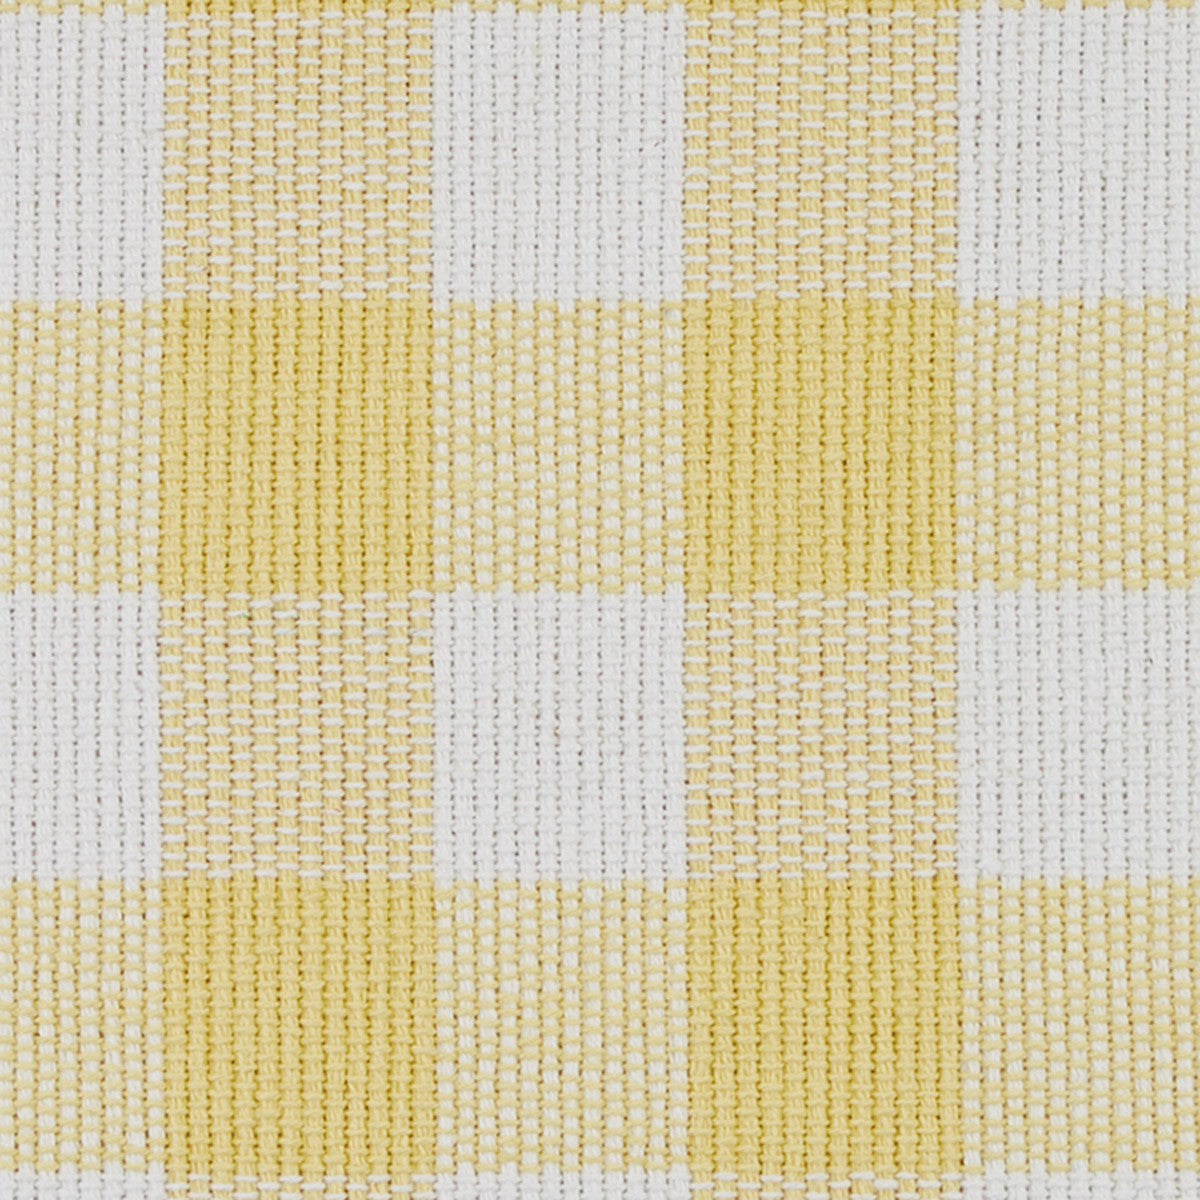 Wicklow Check Yarn Placemat Set-Yellow